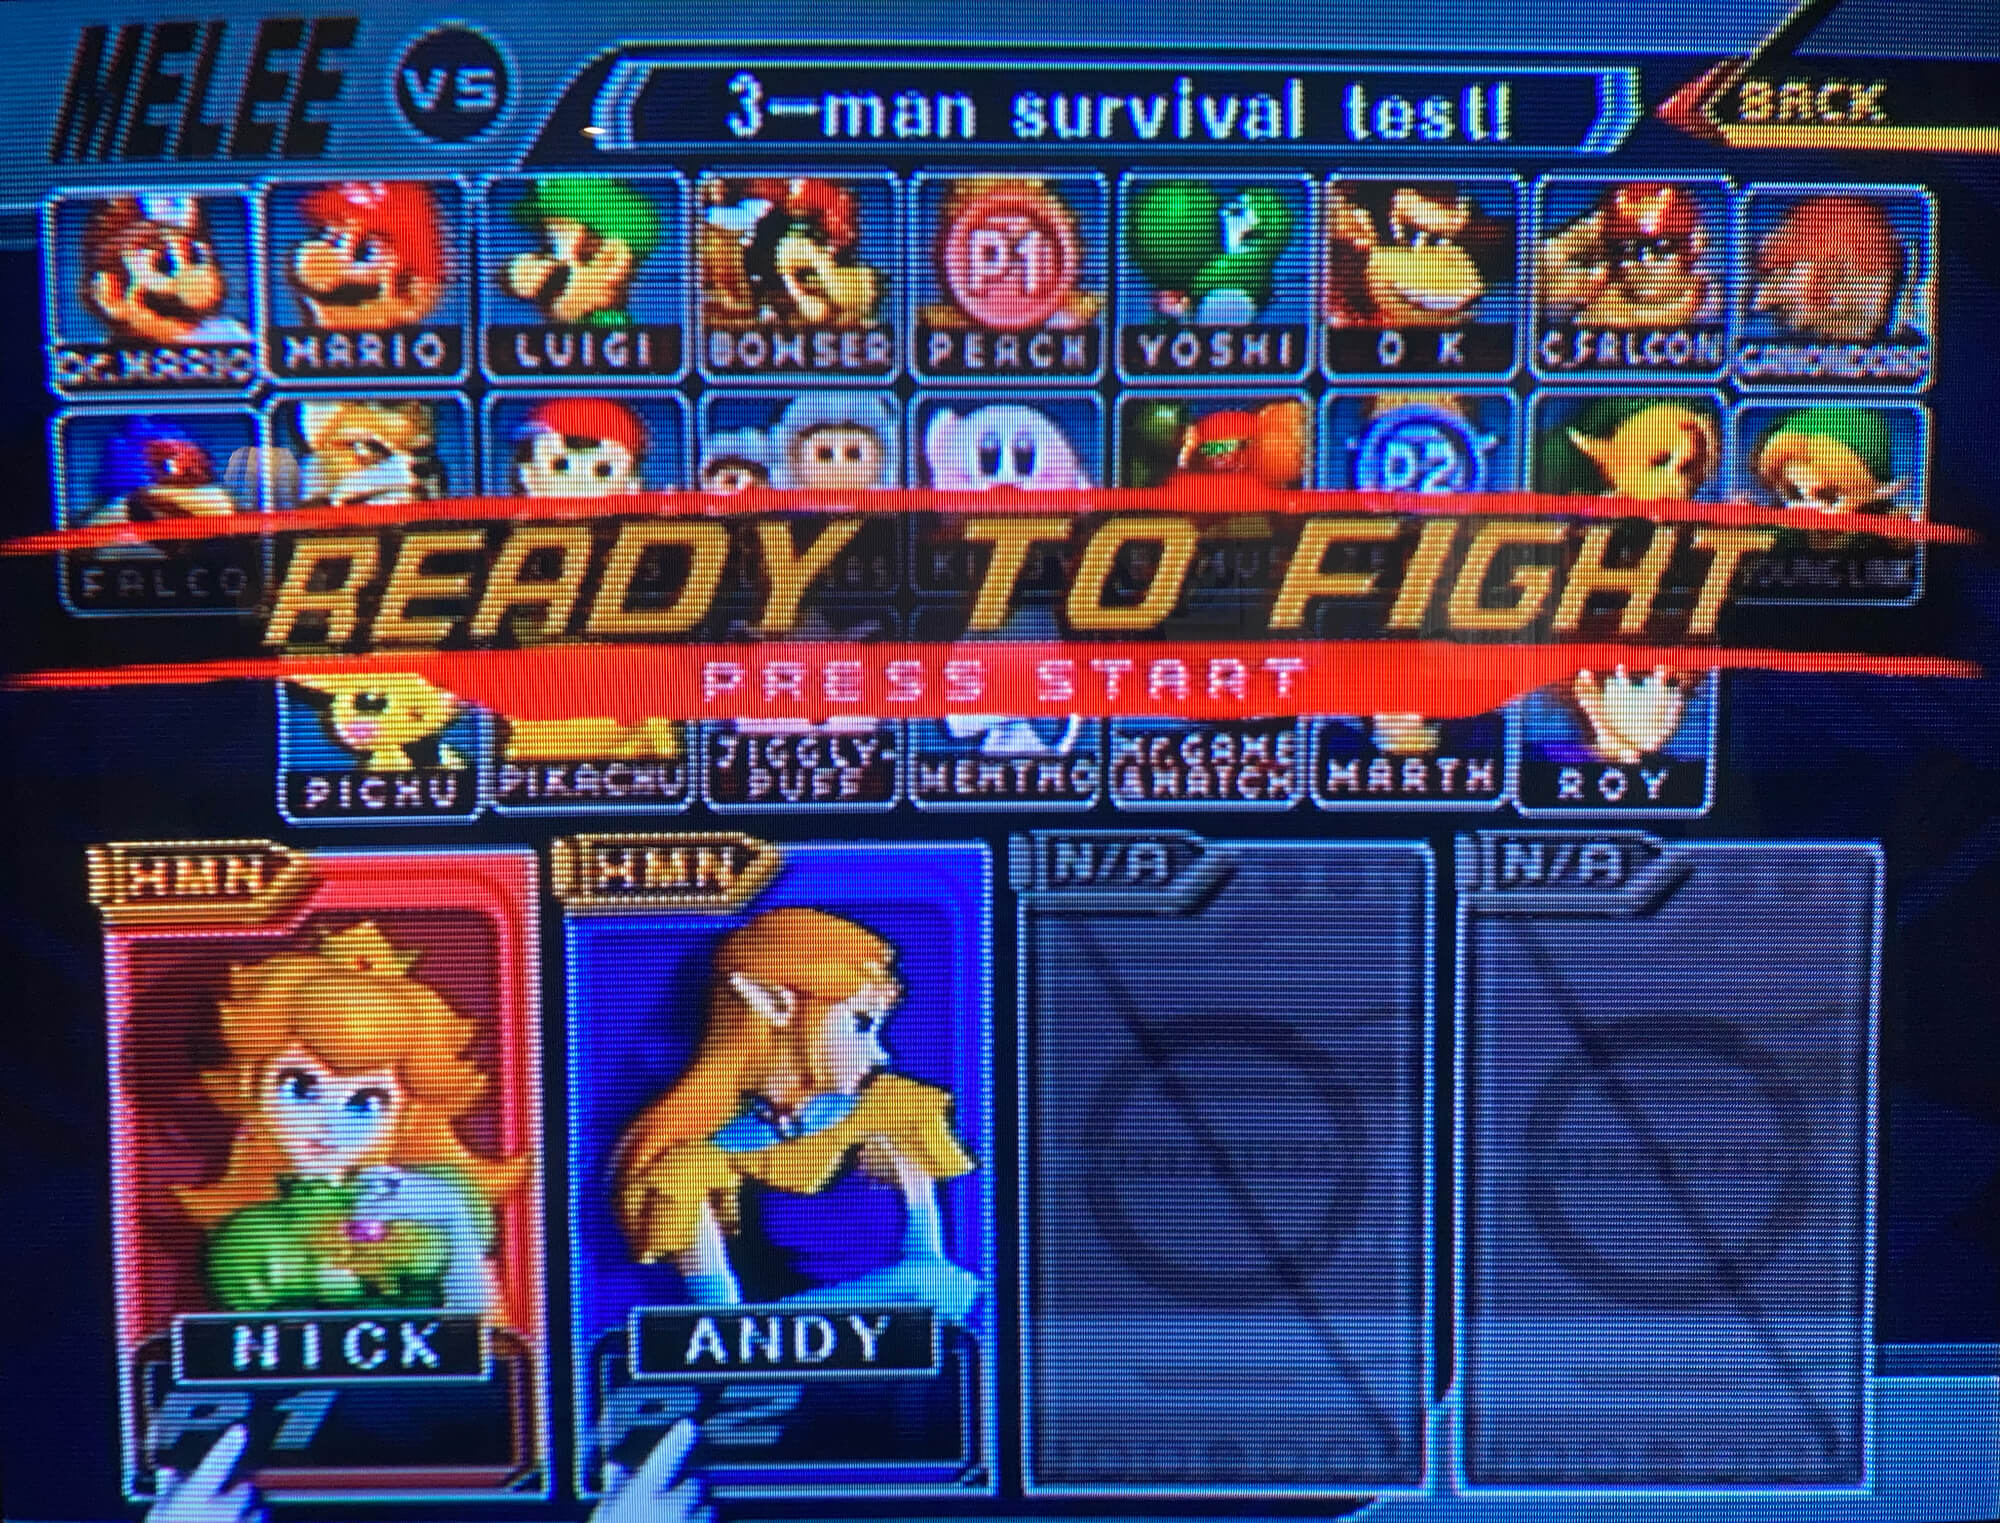 A photo of my CRT displaying the Super Smash Bros. Melee character selection screen.